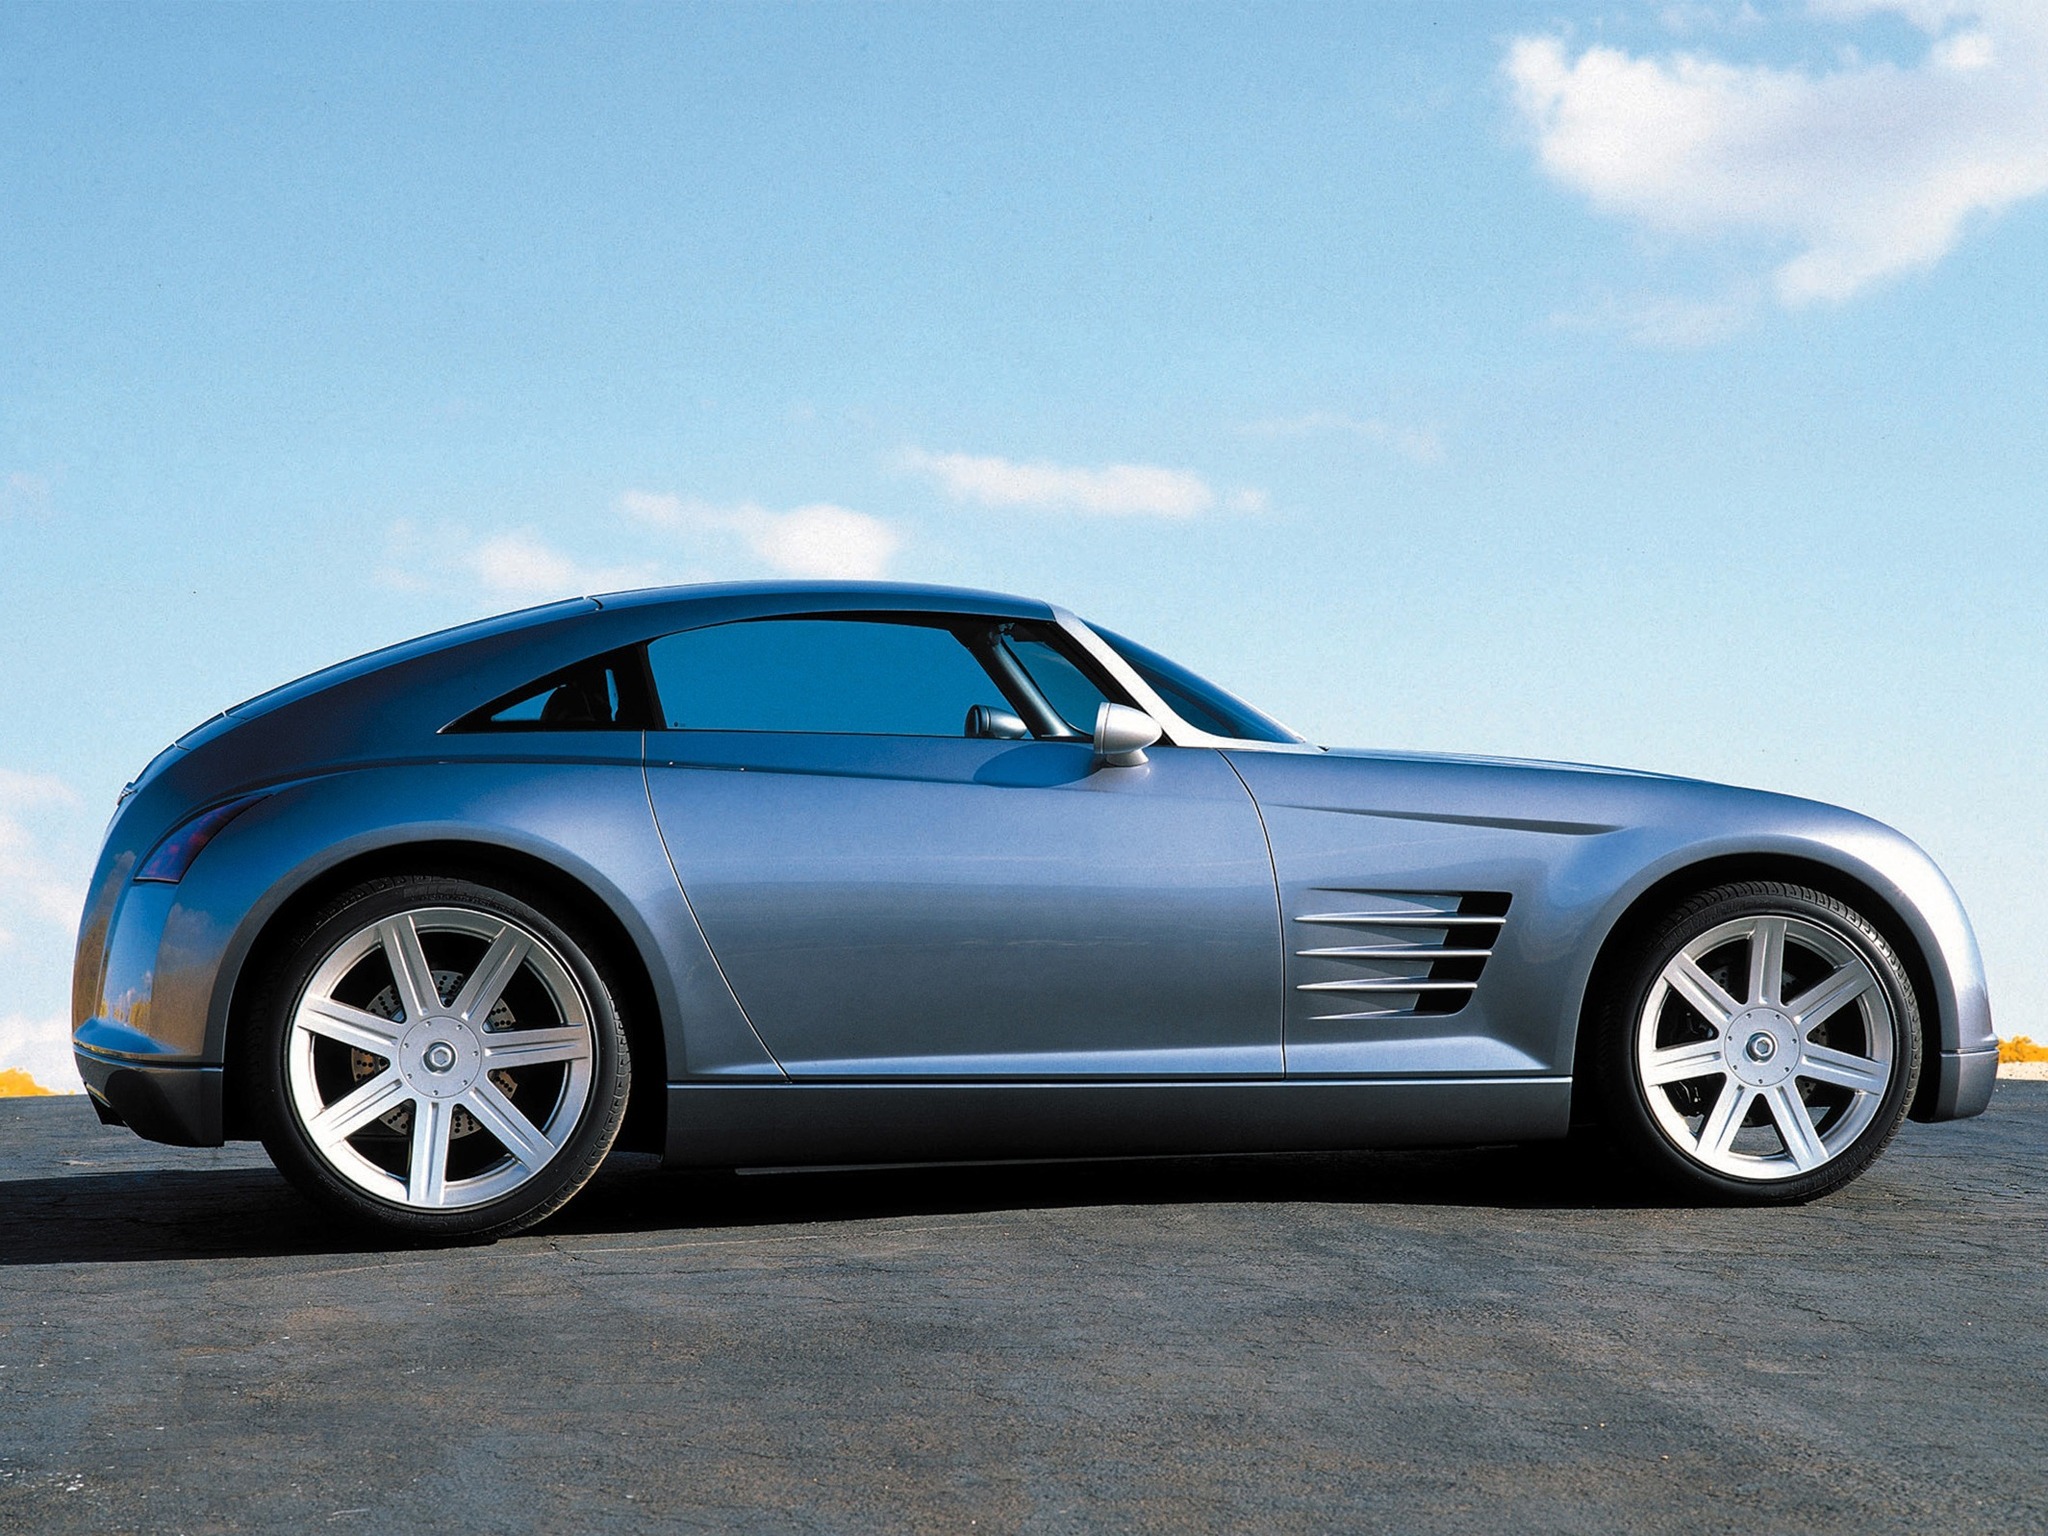 Chrysler Crossfire Concept (2001) - Old Concept Cars